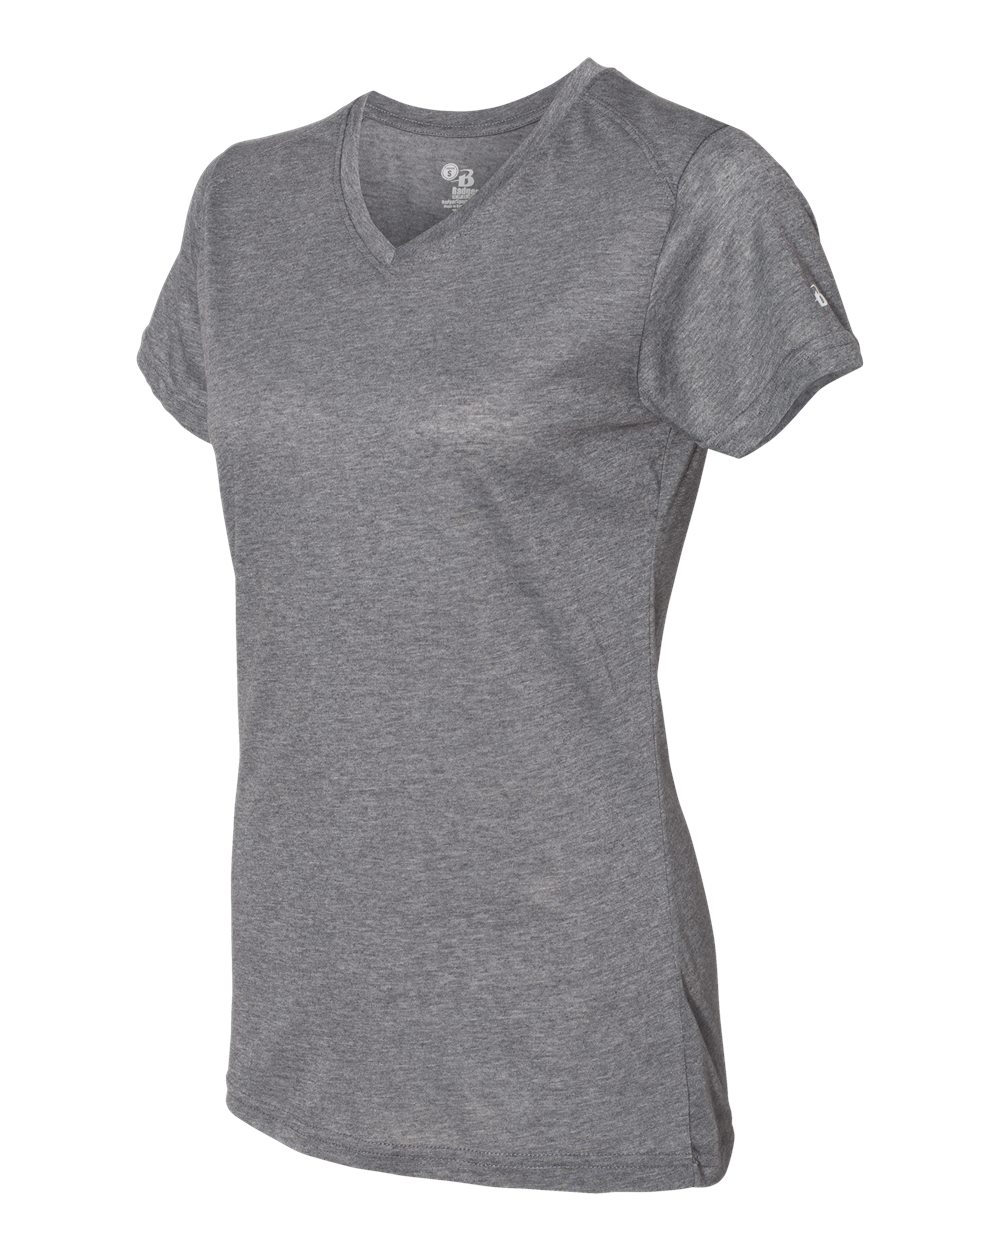 click to view Graphite Heather